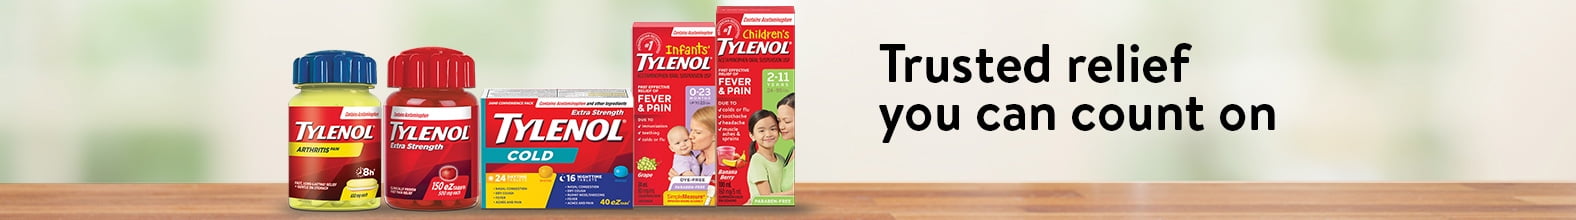 Tylenol® - Trusted relief you can count on.